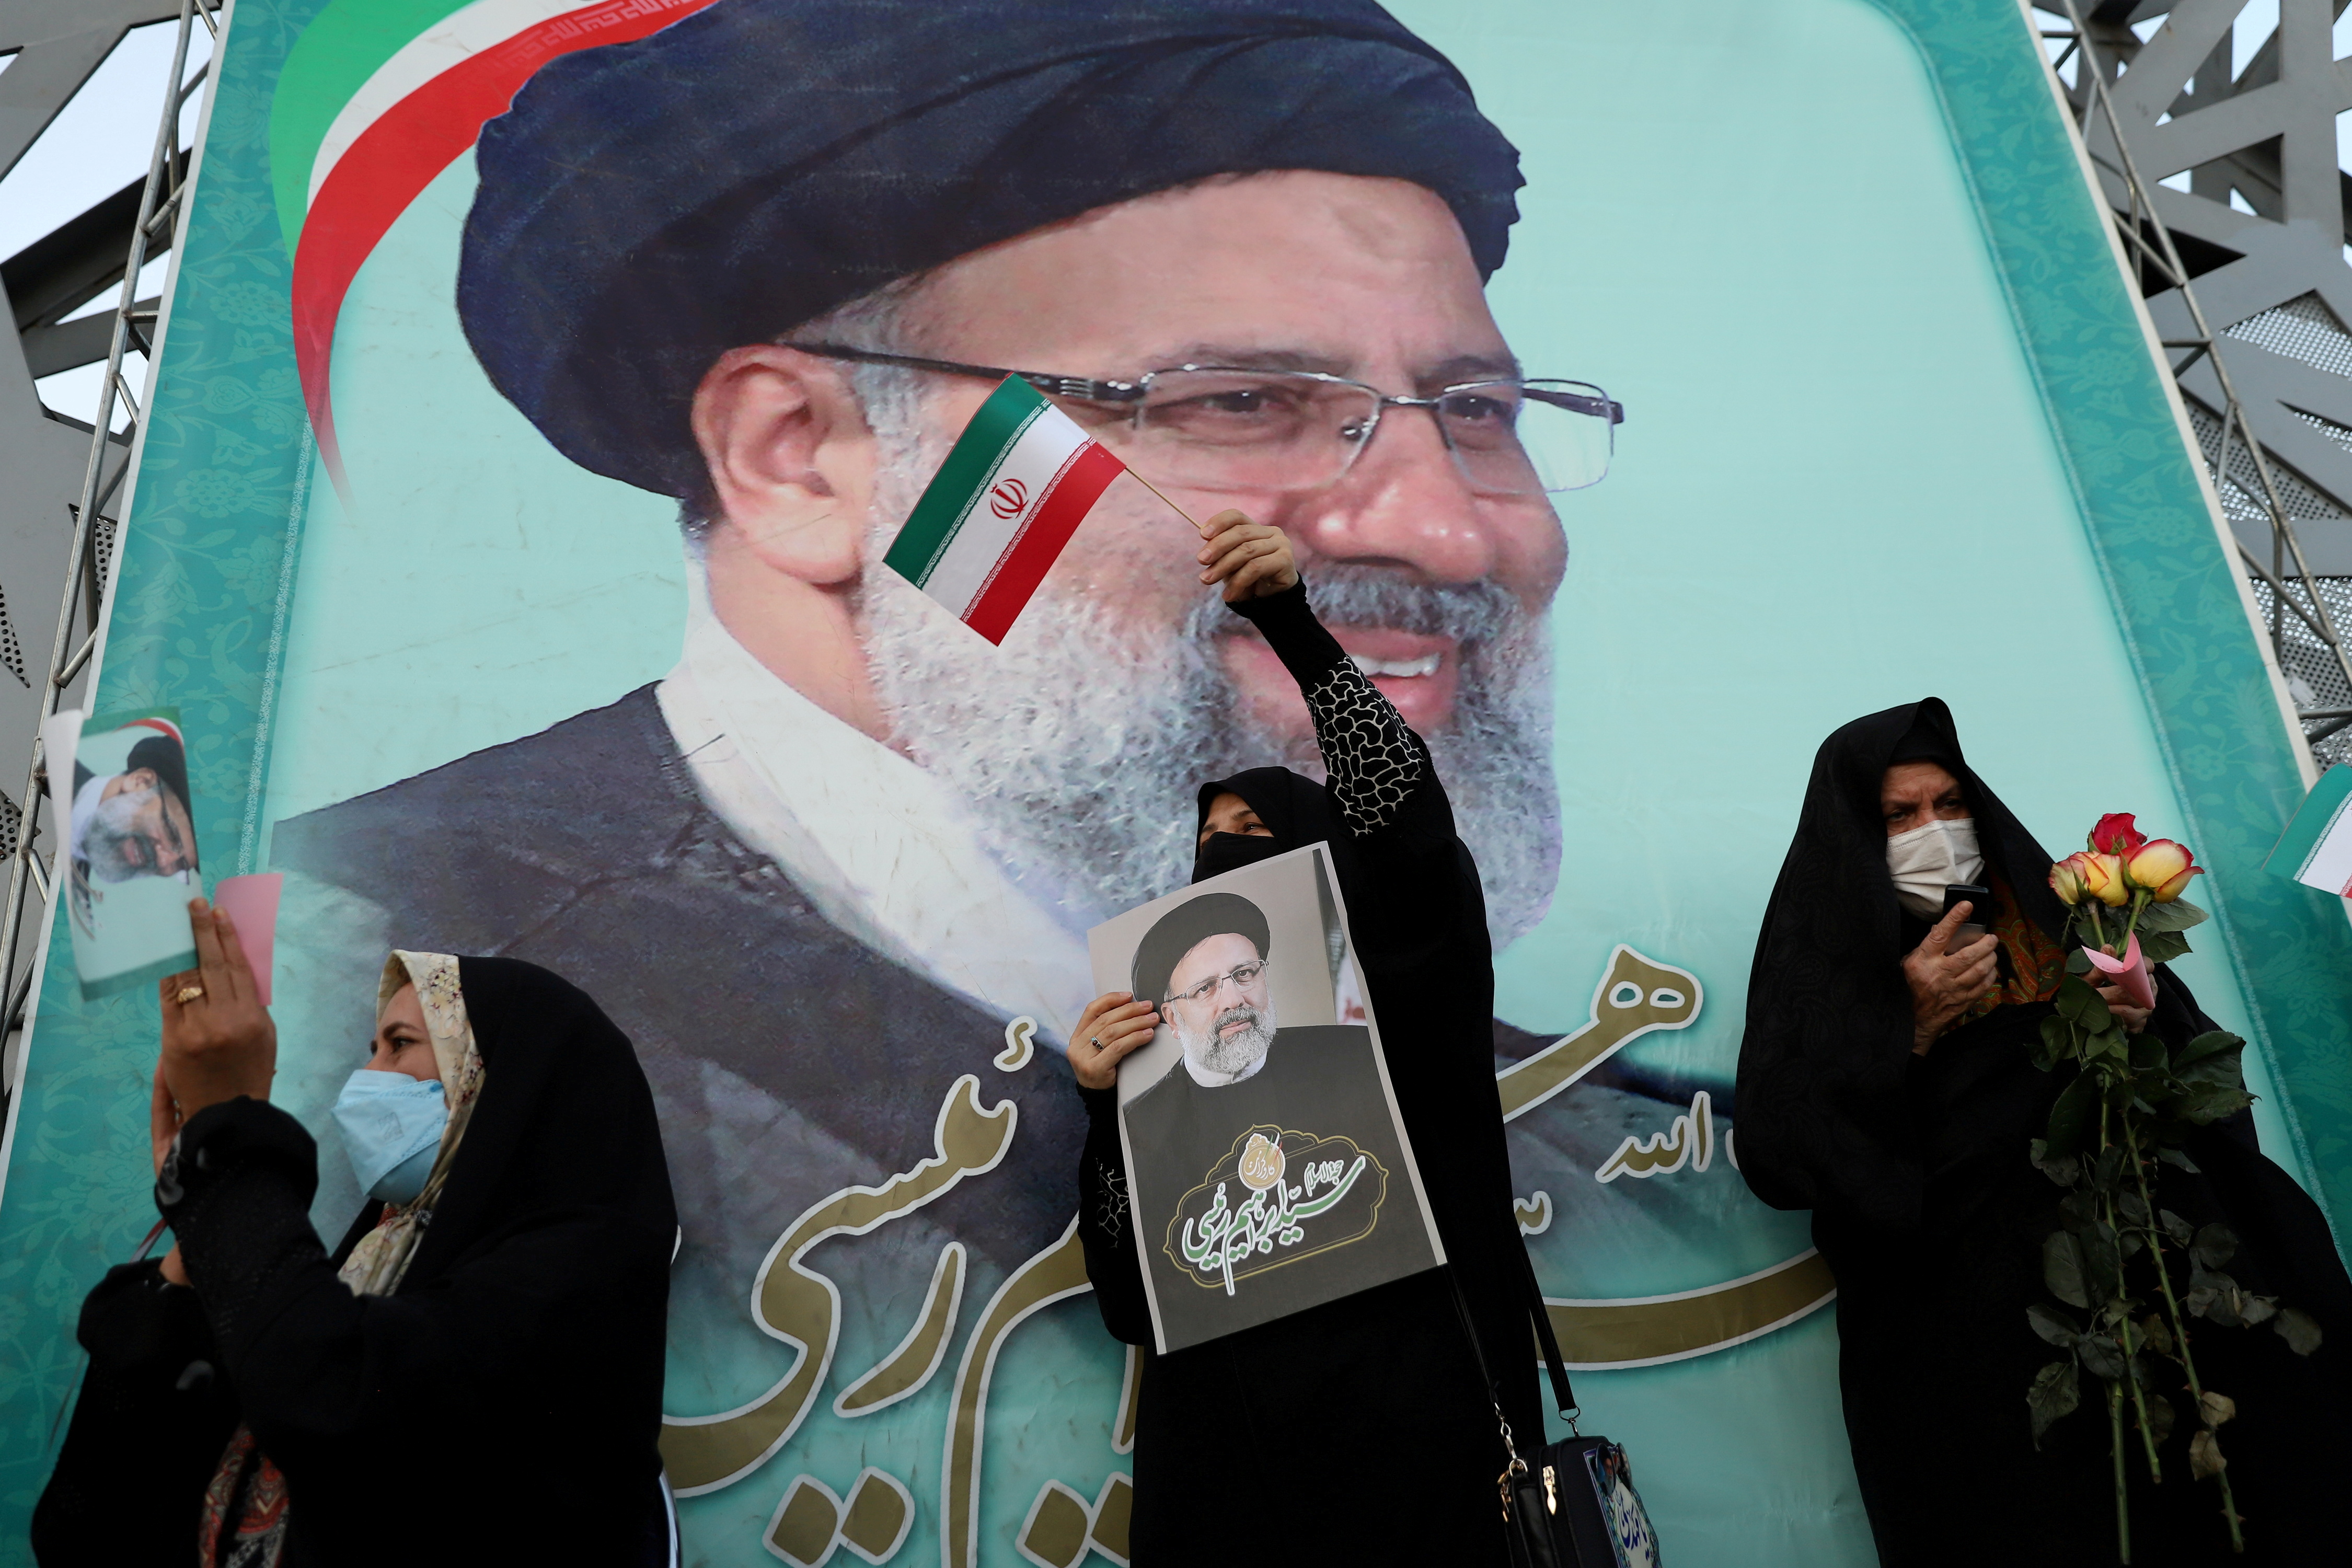 A supporter of Ebrahim Raisi displays his portrait during a celebratory rally for his presidential election victory in Tehran, Iran June 19, 2021.